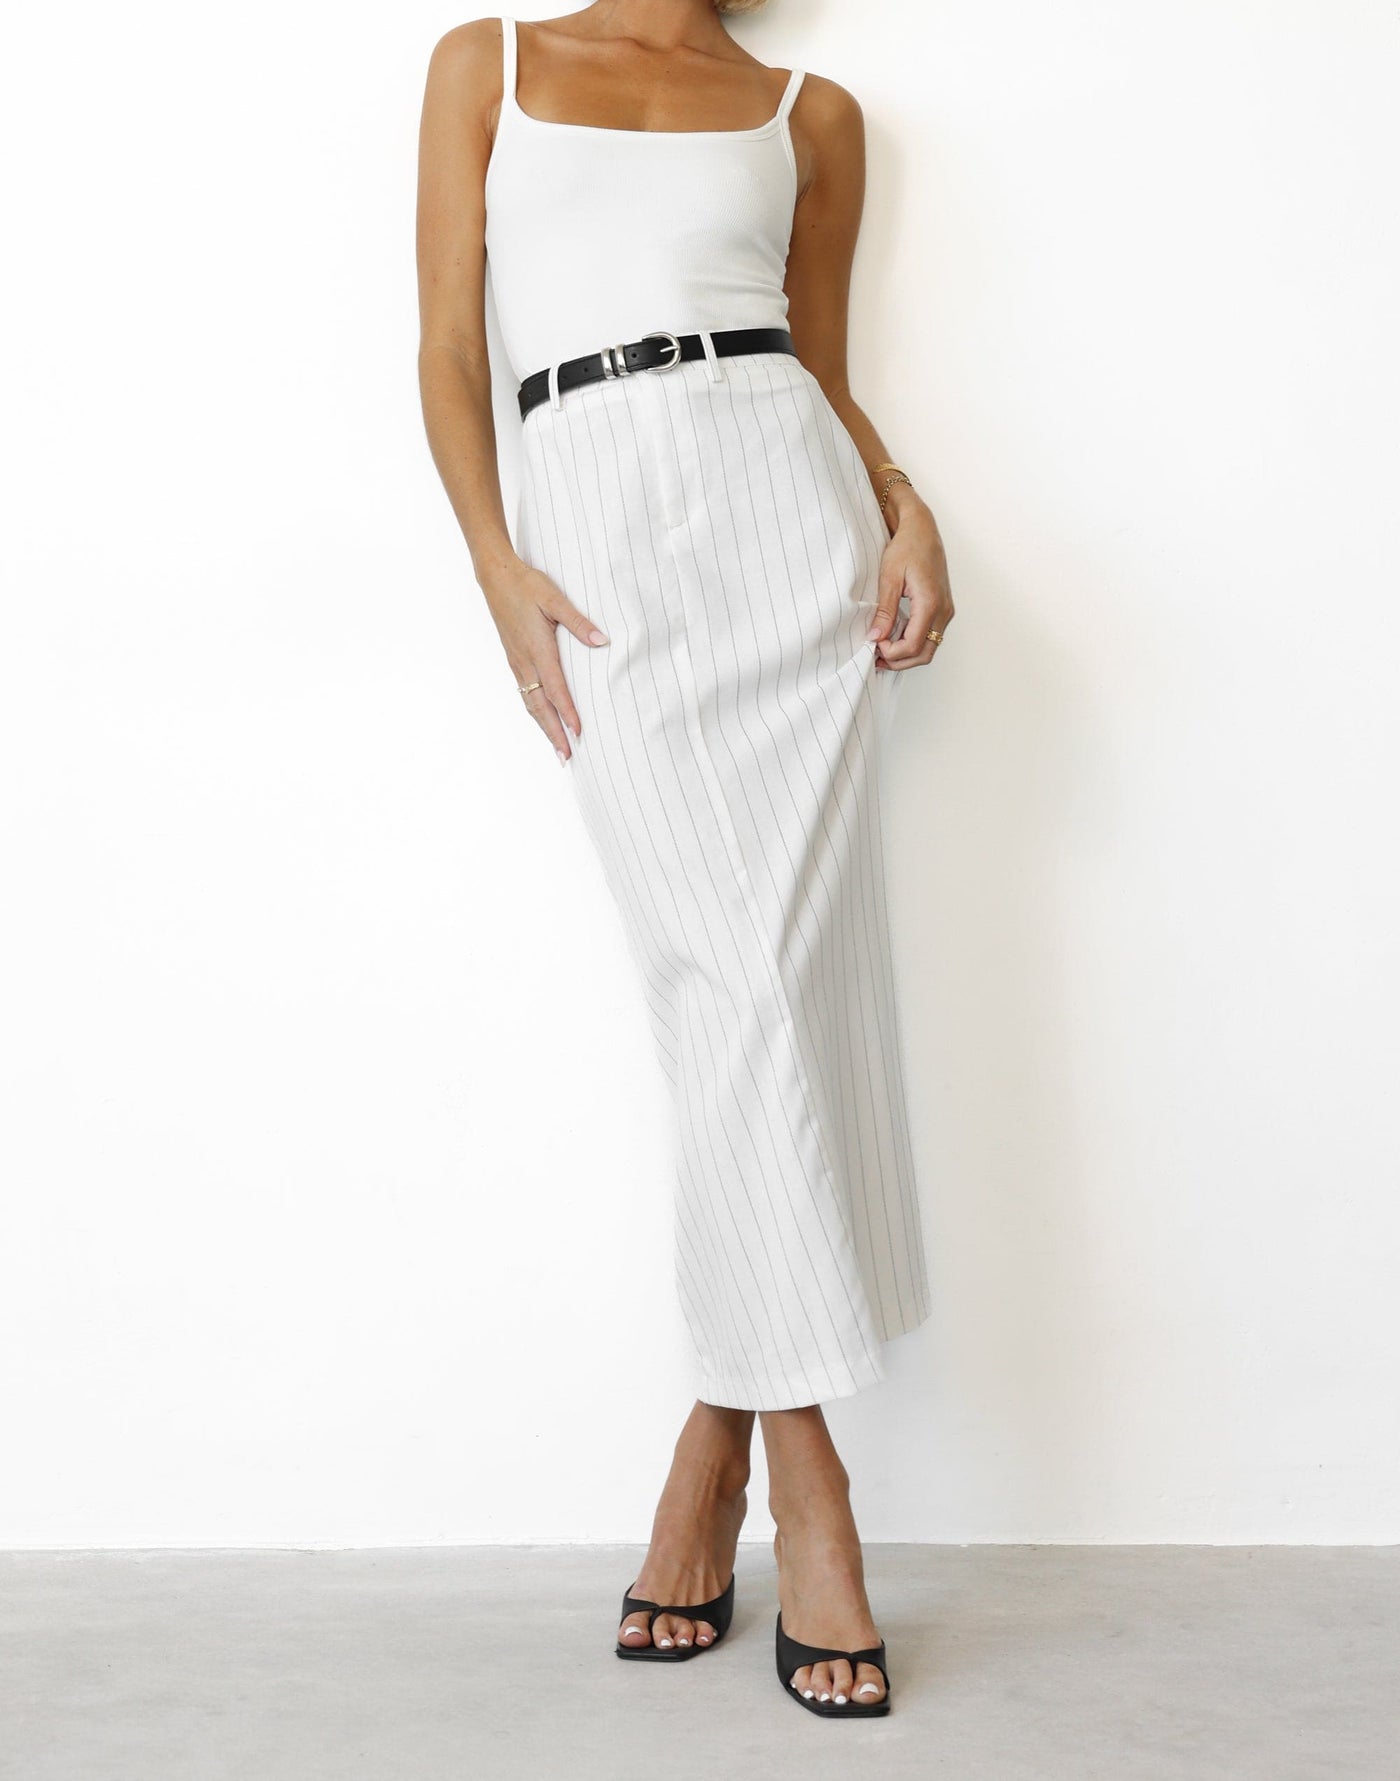 Charlie Maxi Skirt (White Pinstripe) | CHARCOAL Exclusive - High Waisted Split Back Maxi Skirt - Women's Skirt - Charcoal Clothing